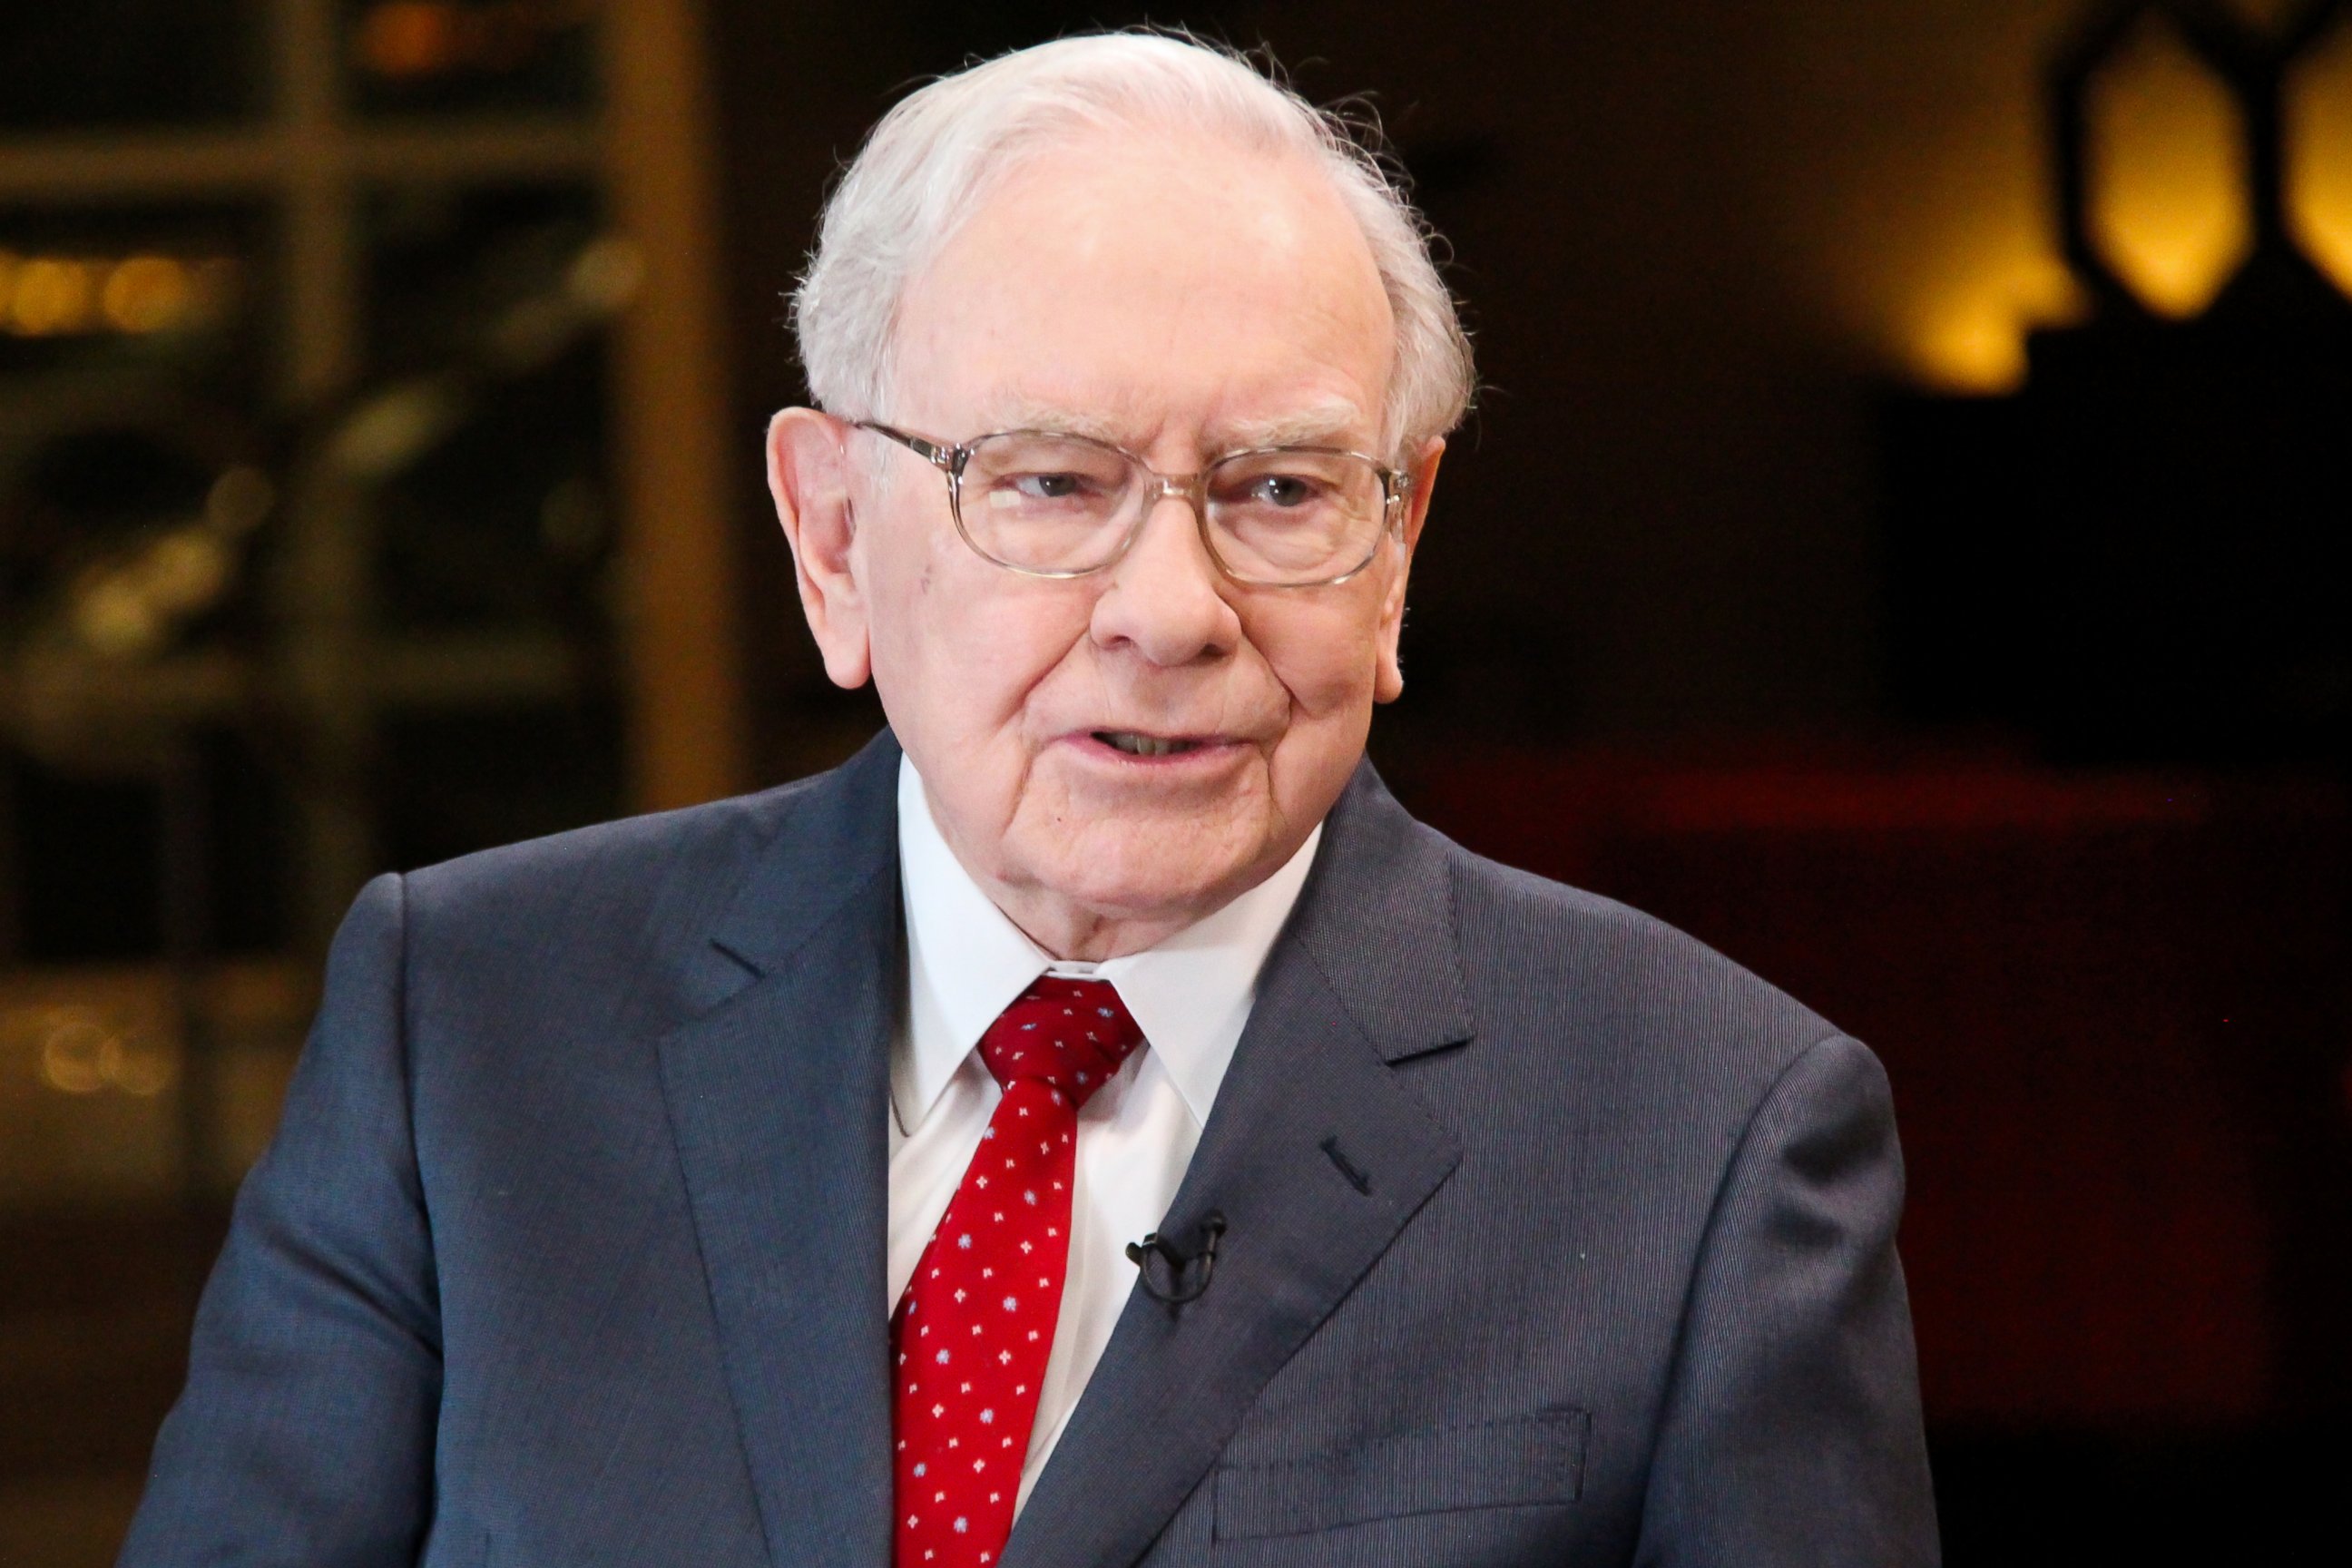 PHOTO: Warren Buffett, chairman and CEO of Berkshire Hathaway, and consistently ranked among the world's wealthiest people, is seen in an interview with Squawk Box, Feb. 29, 2016.